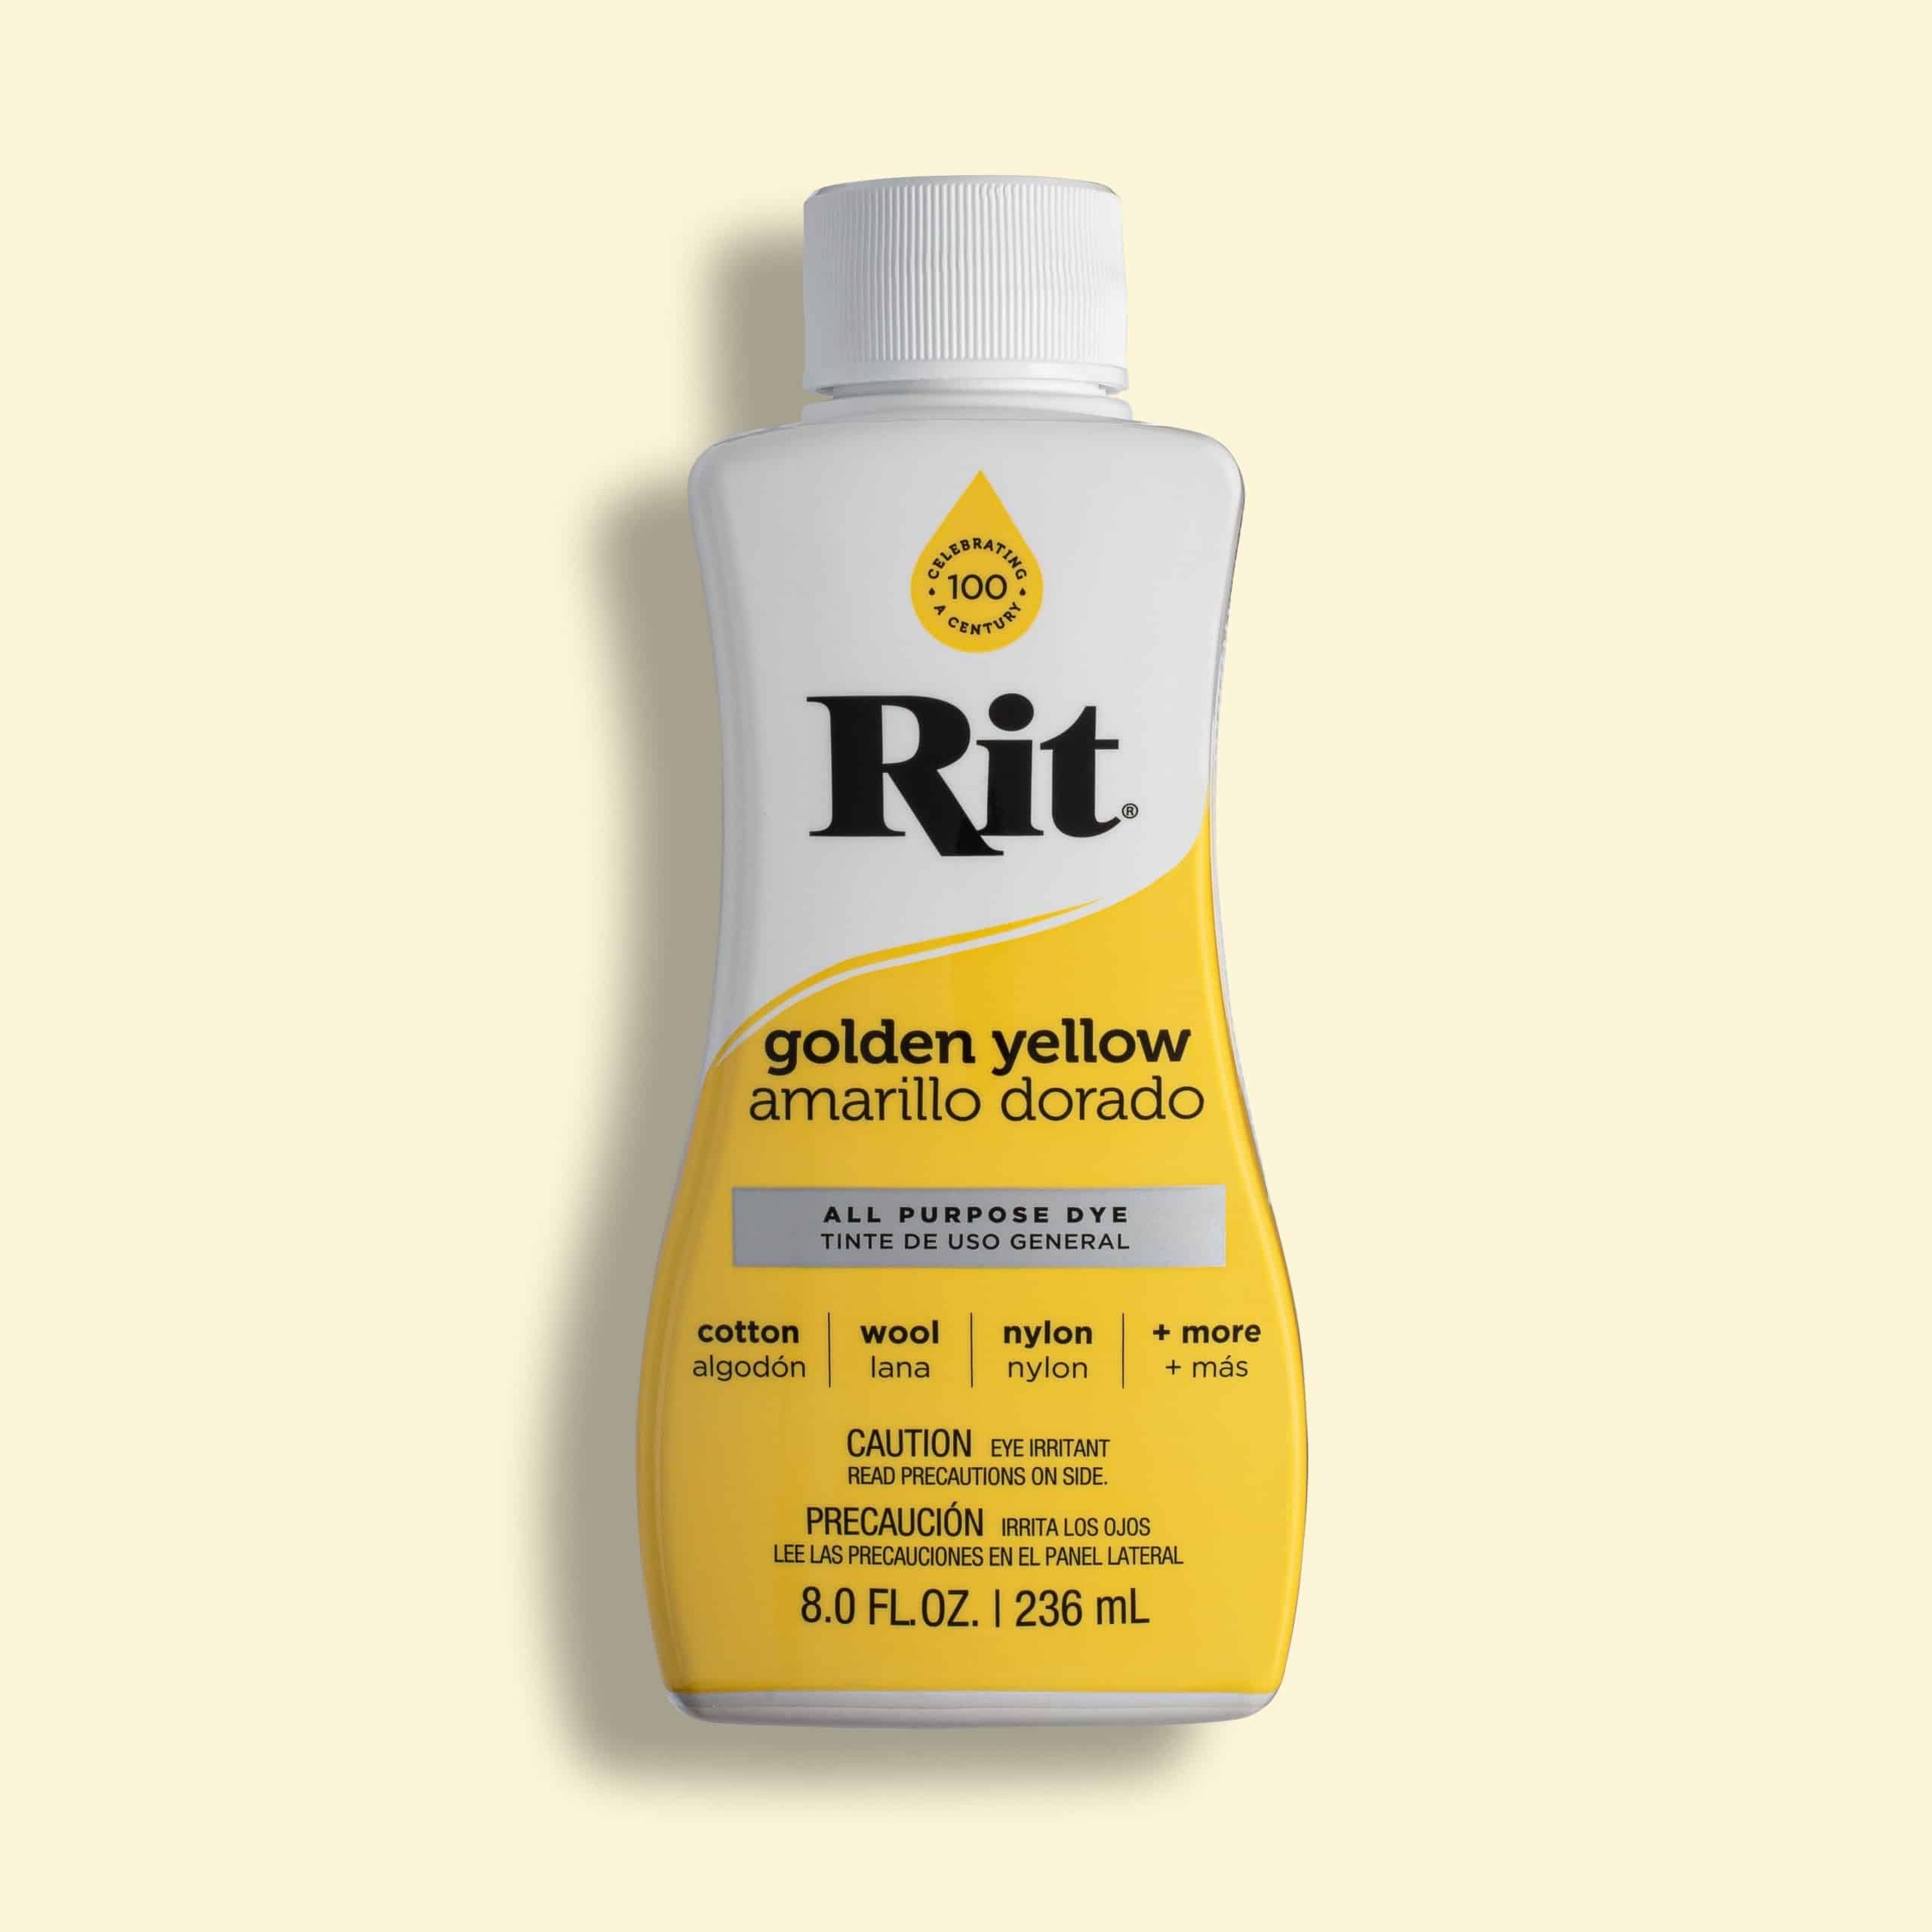 How to Use Rit Color Remover  Colour remover, Rit dye diy